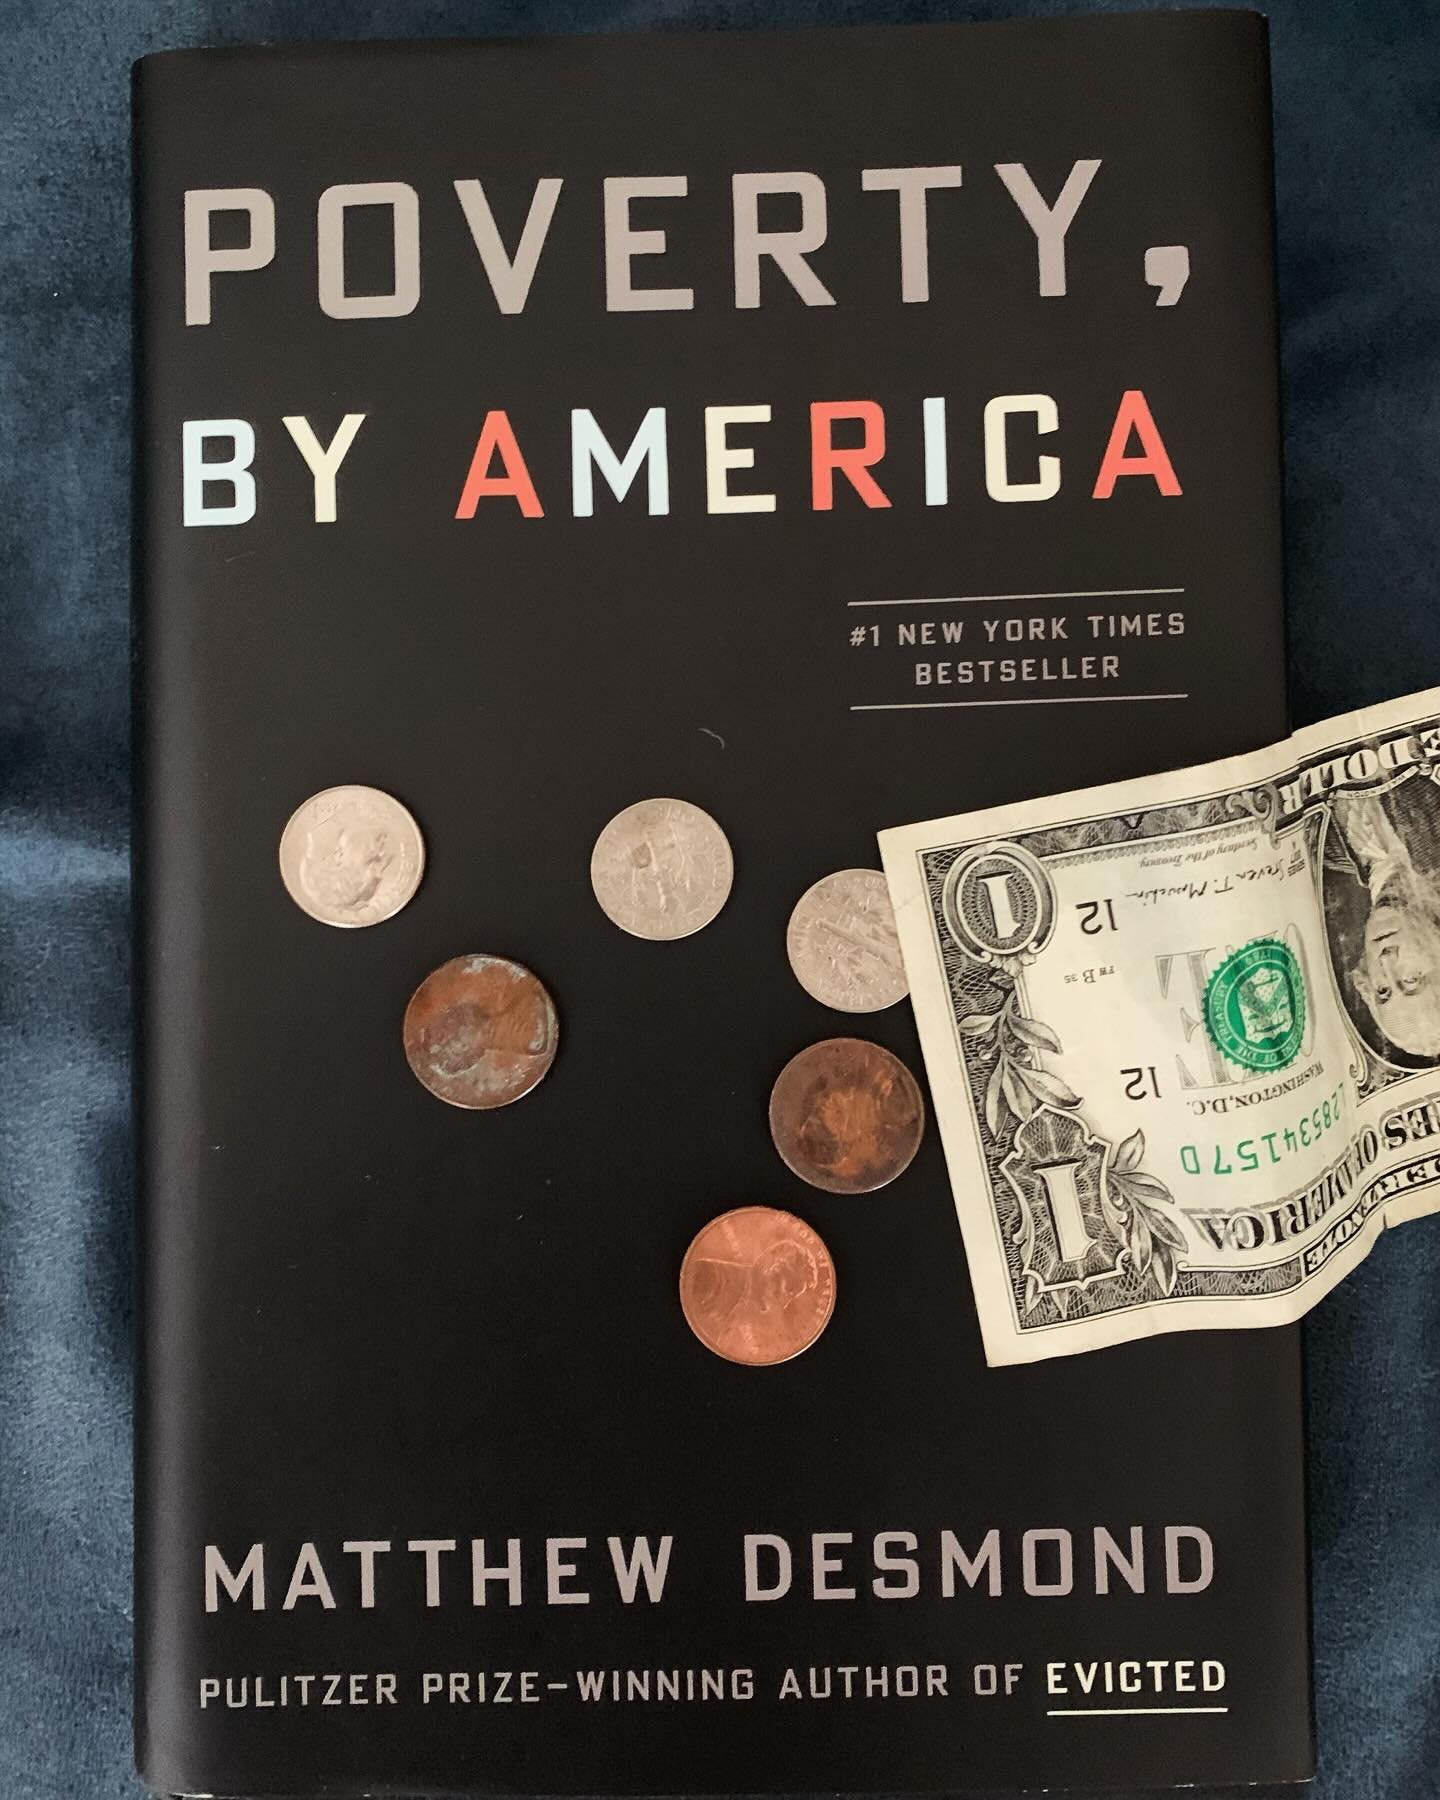 16th book of this year is one to read and reread. There are too many great quotes and passages with insightful information to pick just one, but if I had to choose just one phrase from the book to sum it all up, it&rsquo;s this: Poverty persists beca